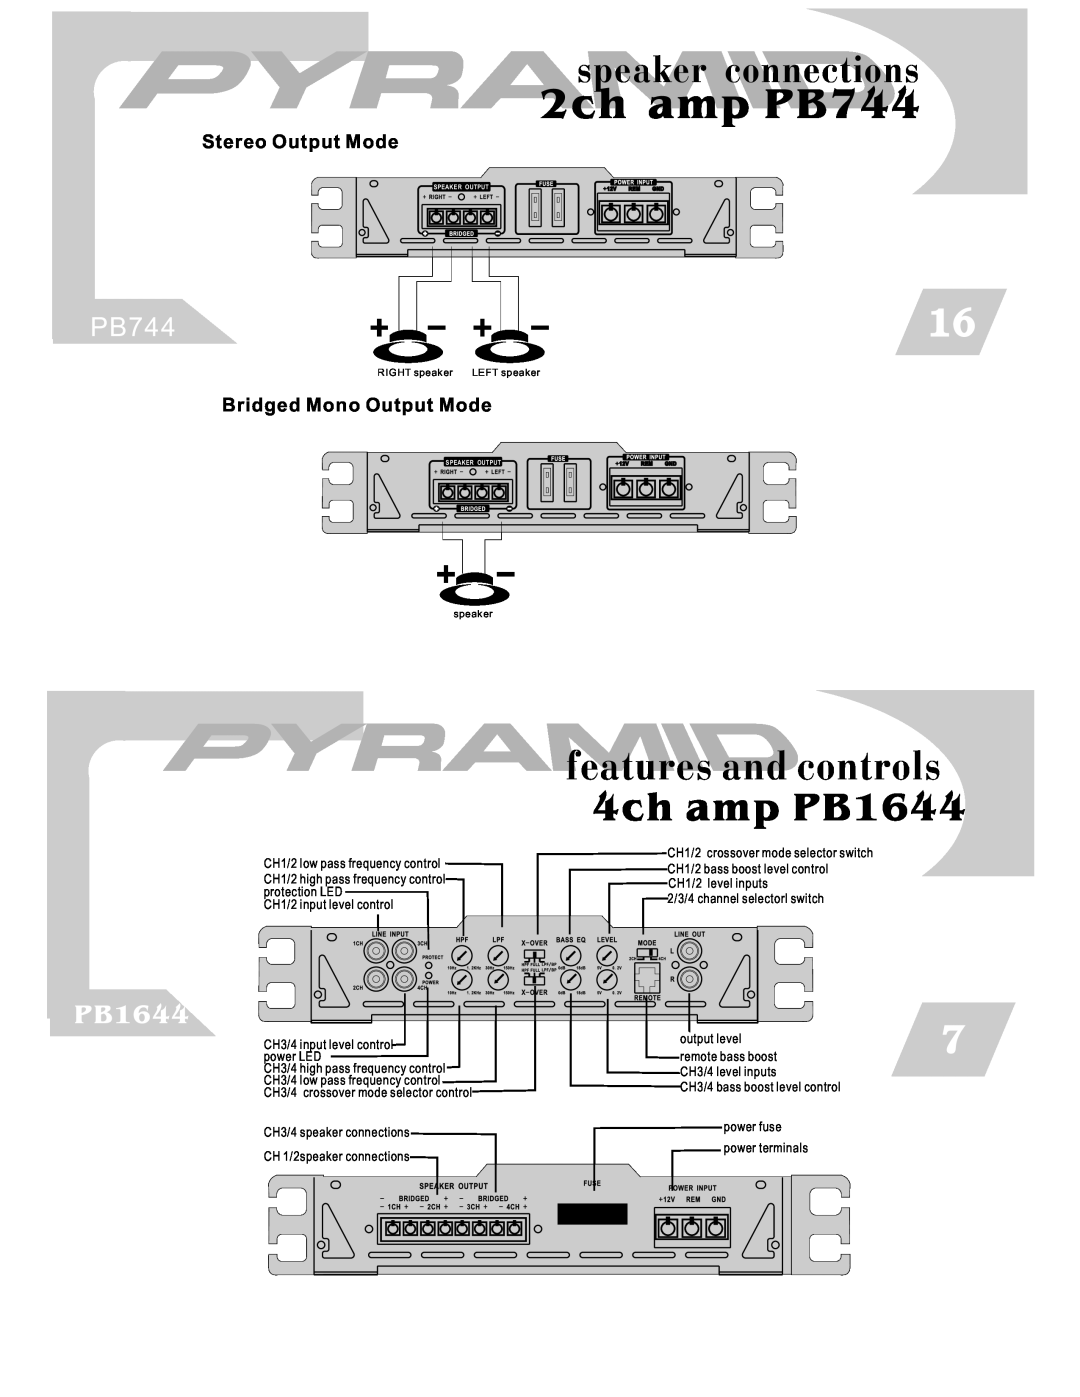 Pyramid Car Audio PB844 4ch amp PB1644, 2ch amp PB744, features and controls, speaker connections, Stereo Output Mode 